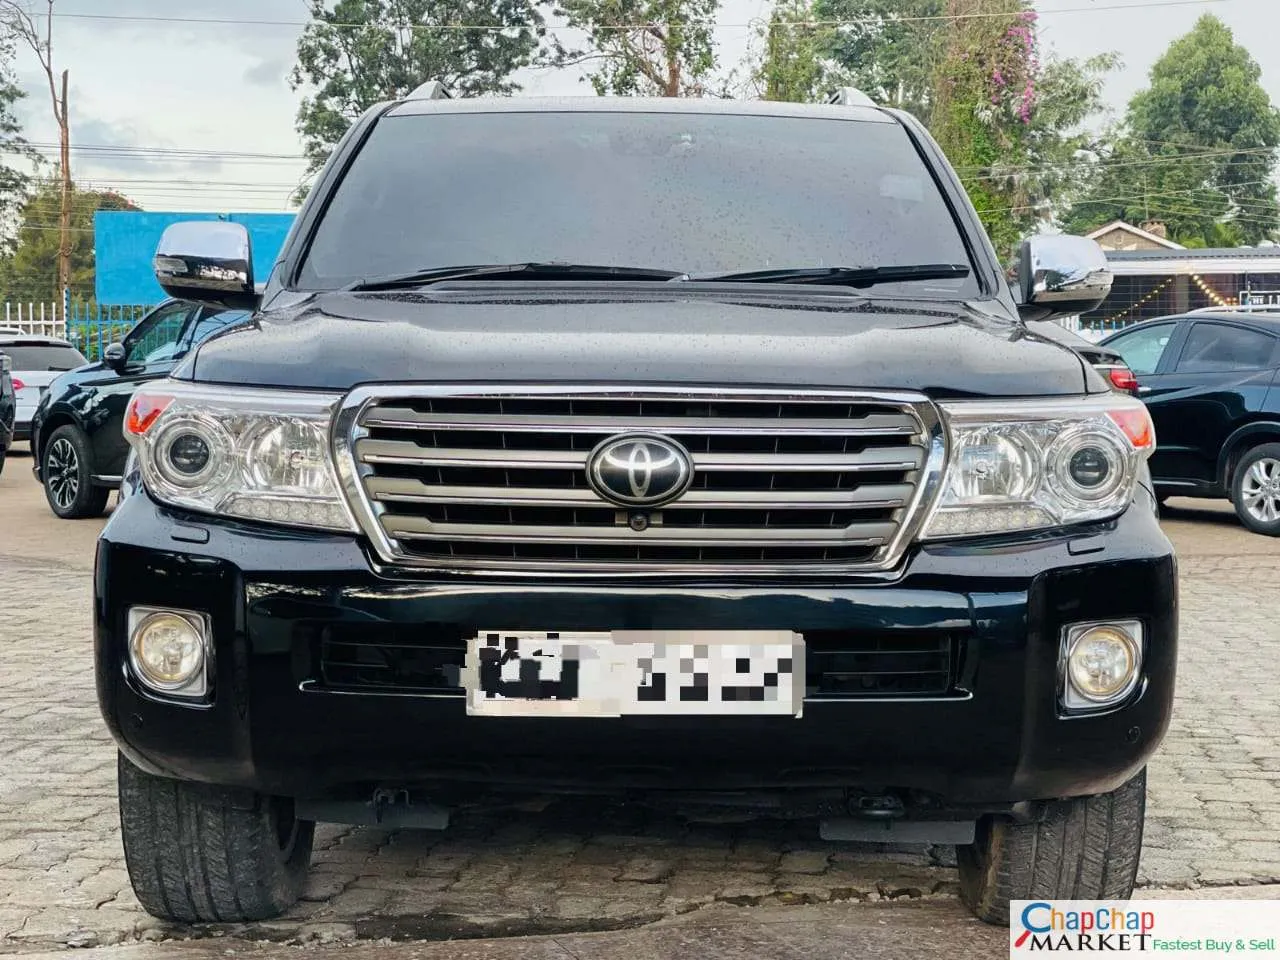 Toyota Land Cruiser V8 ZX QUICKEST SALE You Pay 30% Deposit Trade in Ok Hire purchase installments